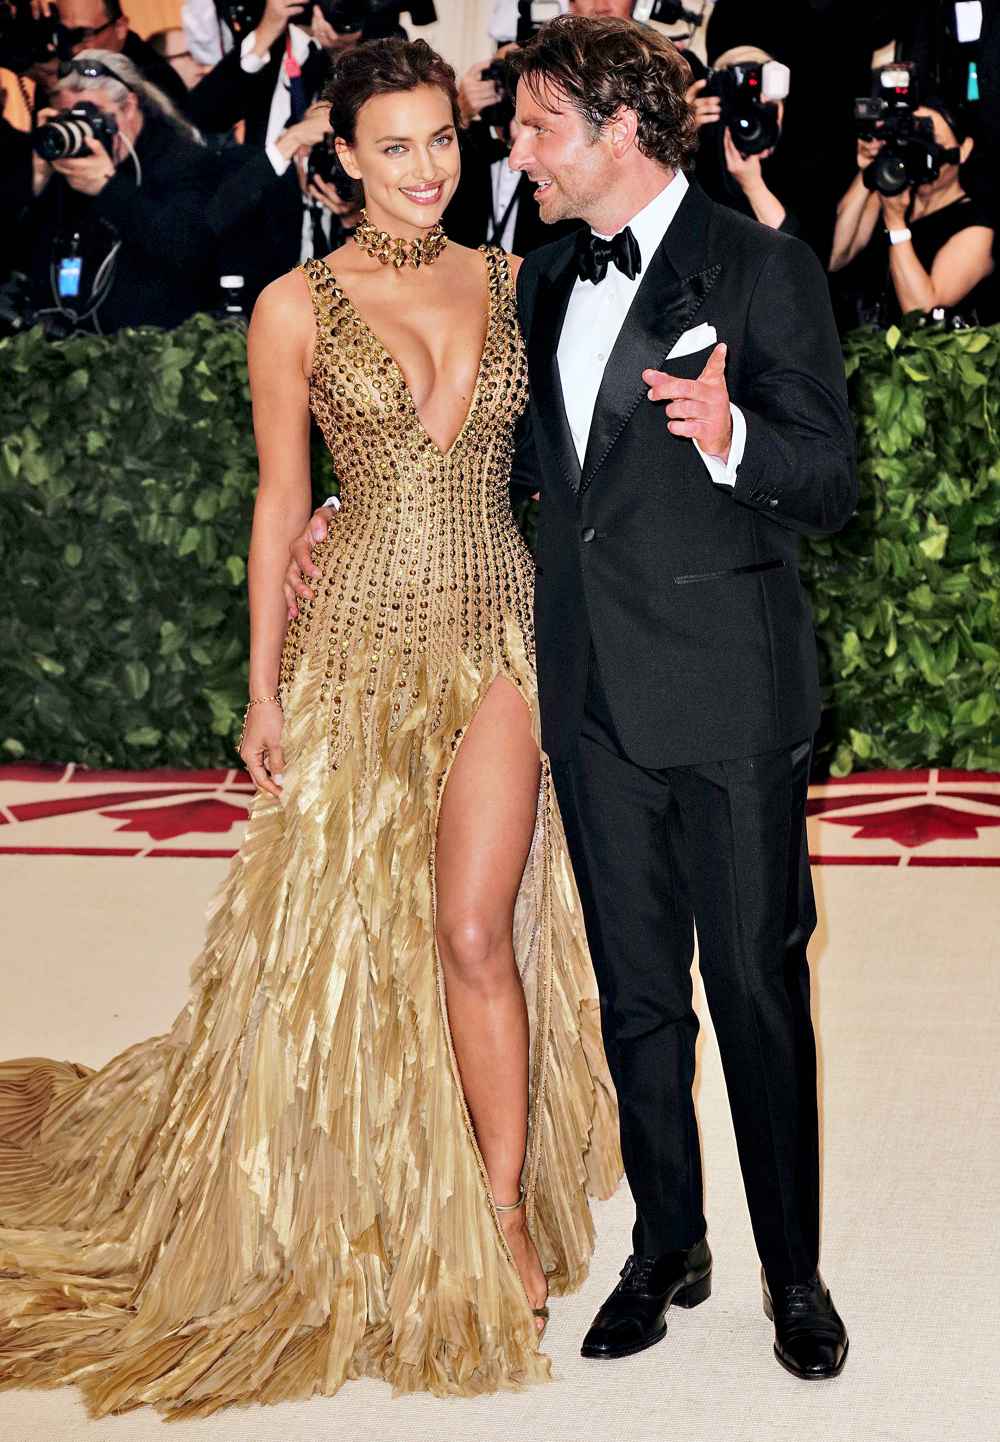 Irina Shayk and Bradley Cooper attend the Heavenly Bodies: Fashion & The Catholic Imagination Costume Institute Gala at The Metropolitan Museum of Art on May 7, 2018 in New York City.